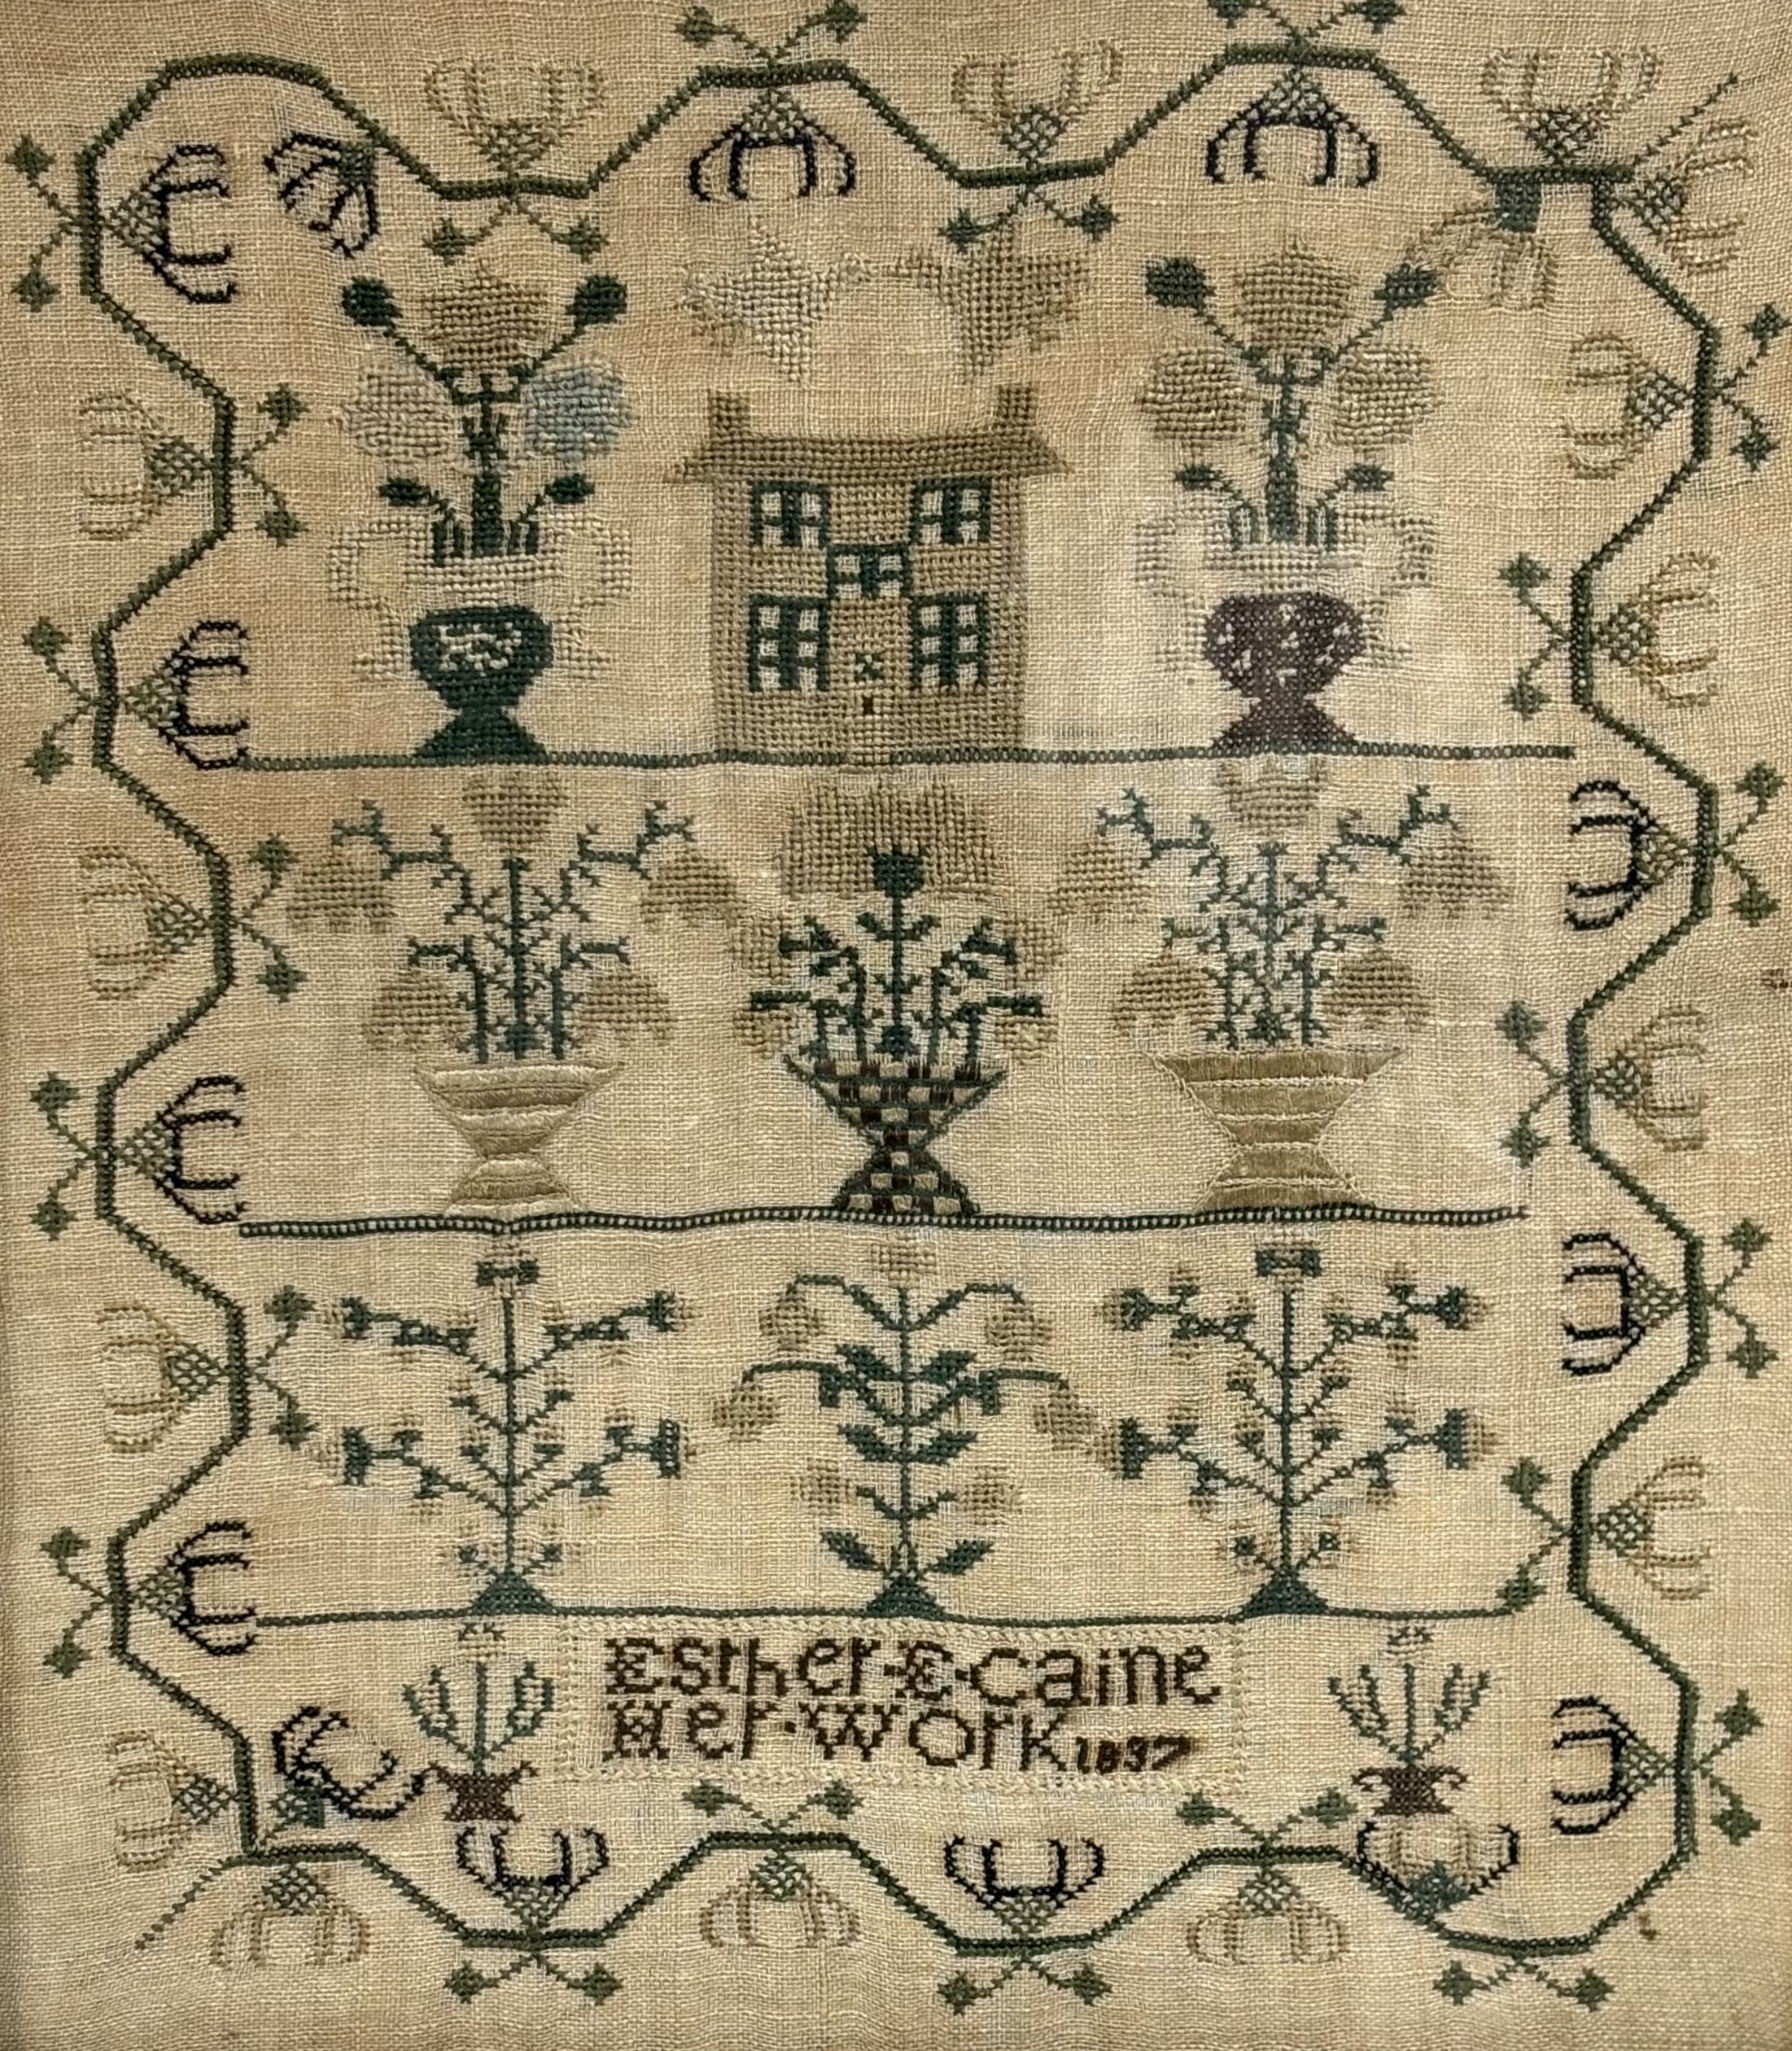 An early Victorian needlework sampler, Esther Caine, Her Work, 1837, worked in polychrome threads - Image 2 of 2